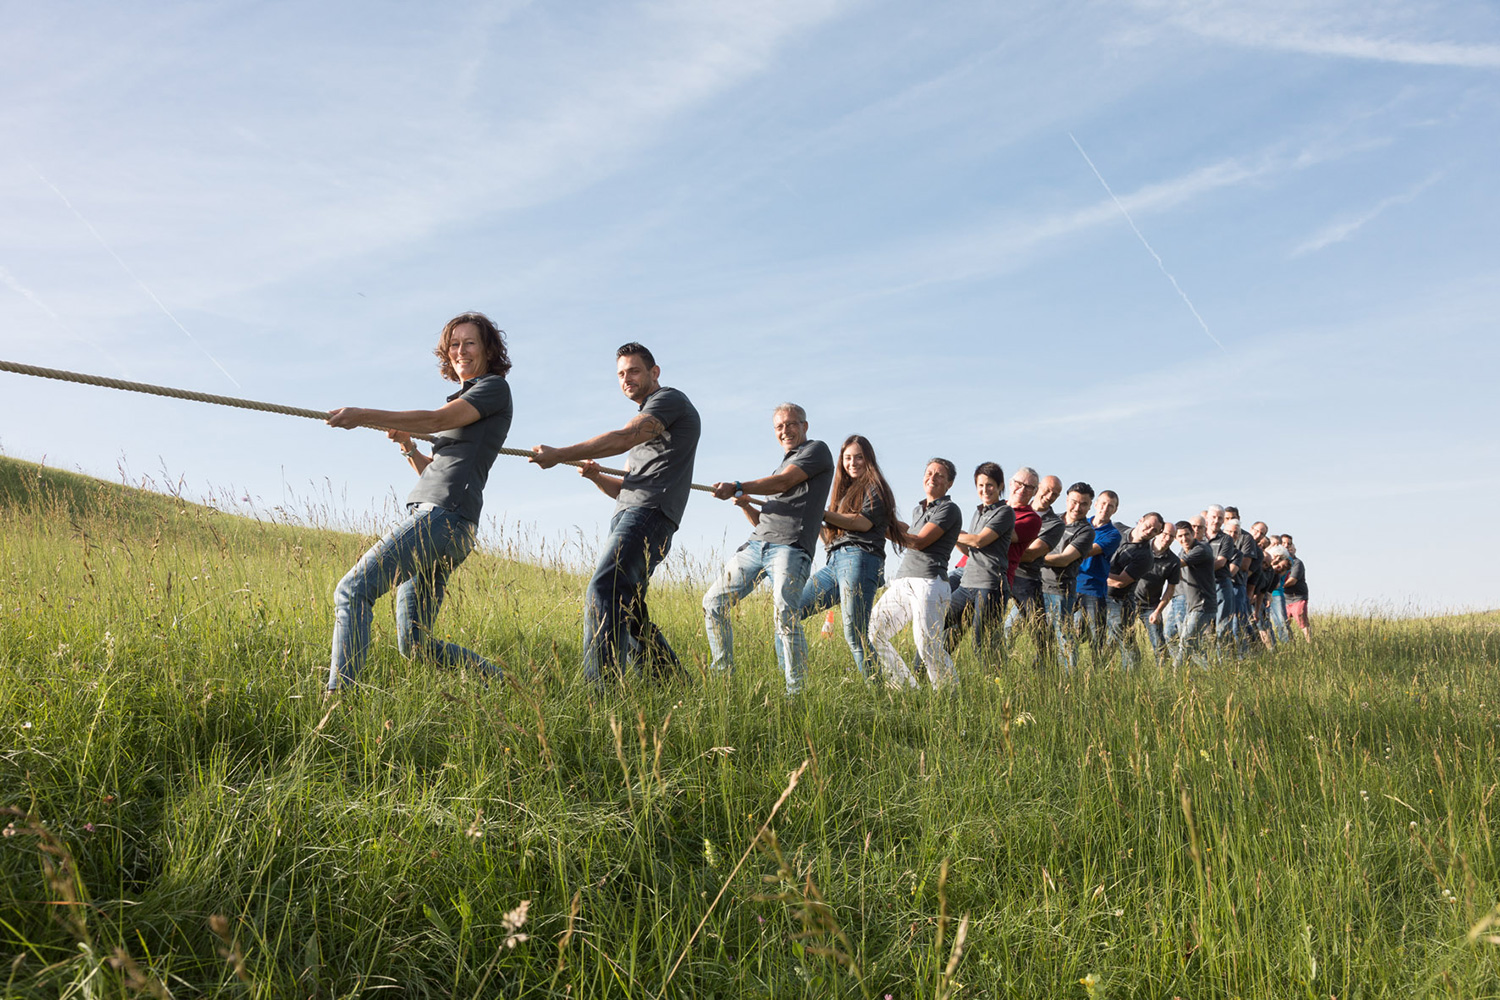 MBA team at a tug-of-war in a meadow